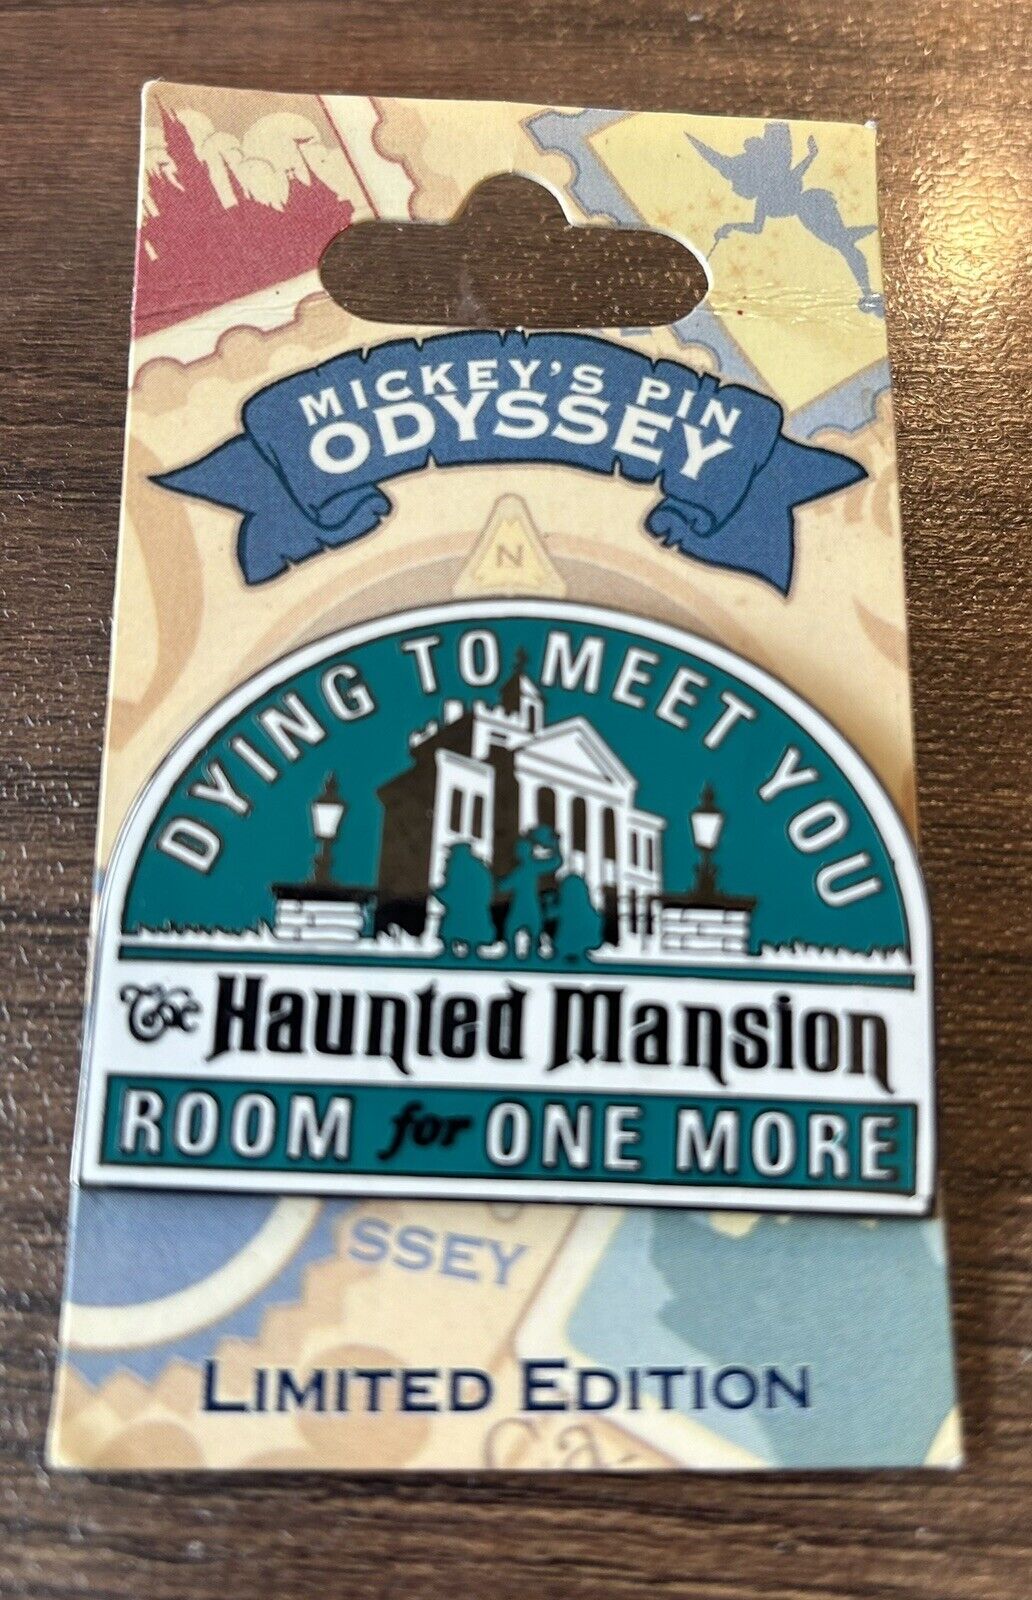 DISNEY HAUNTED MANSION MICKEY’S PIN ODYSSEY ROOM FOR ONE 1 MORE DYING TO MEET YU